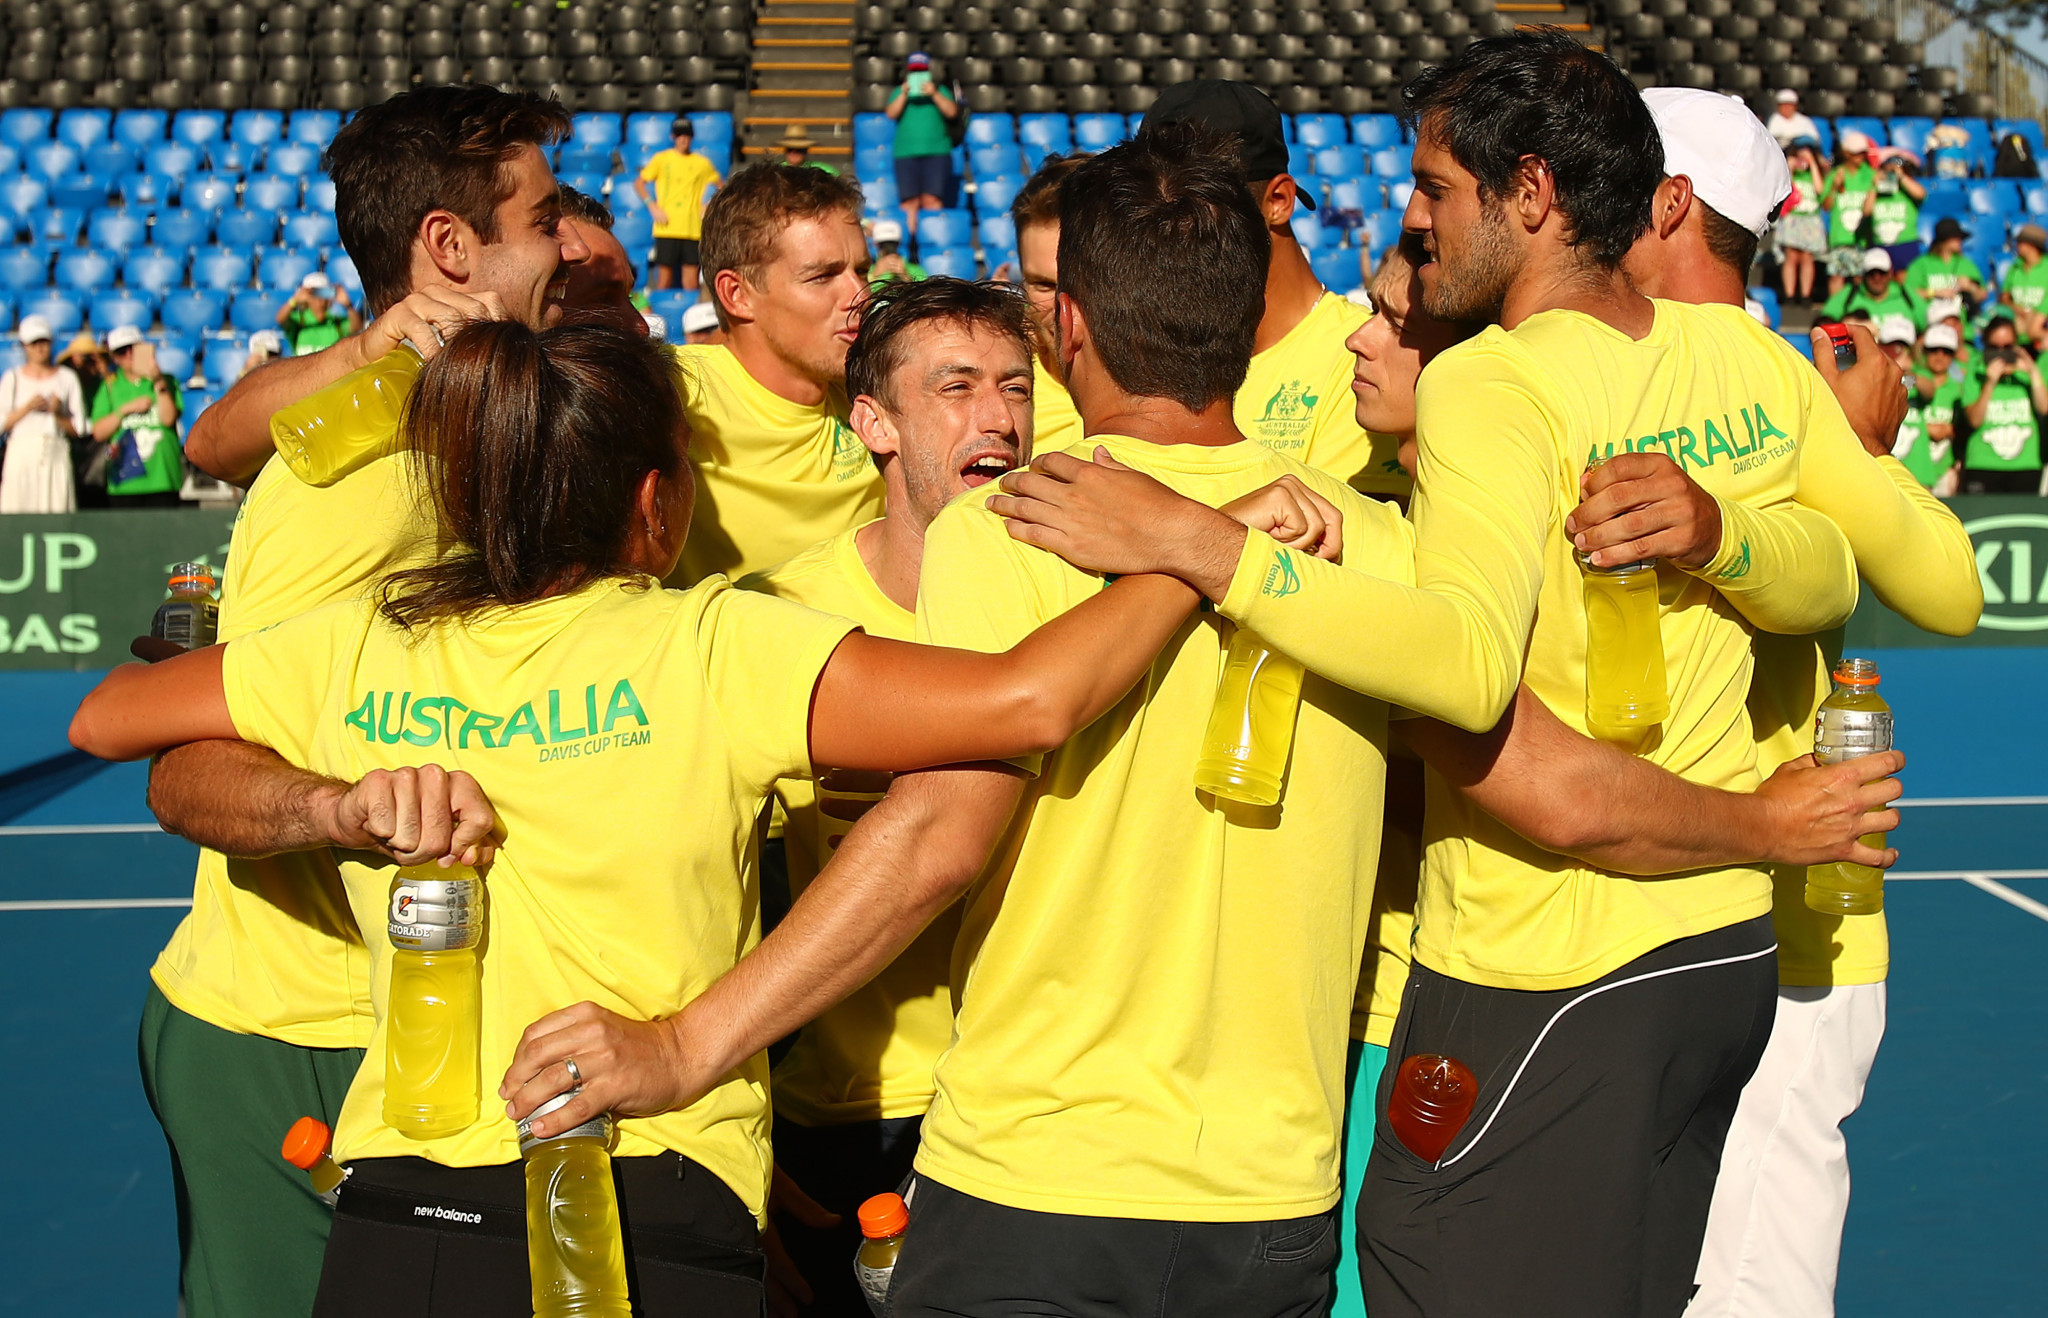 Australia among nations to book their place in Davis Cup Finals as qualifiers end